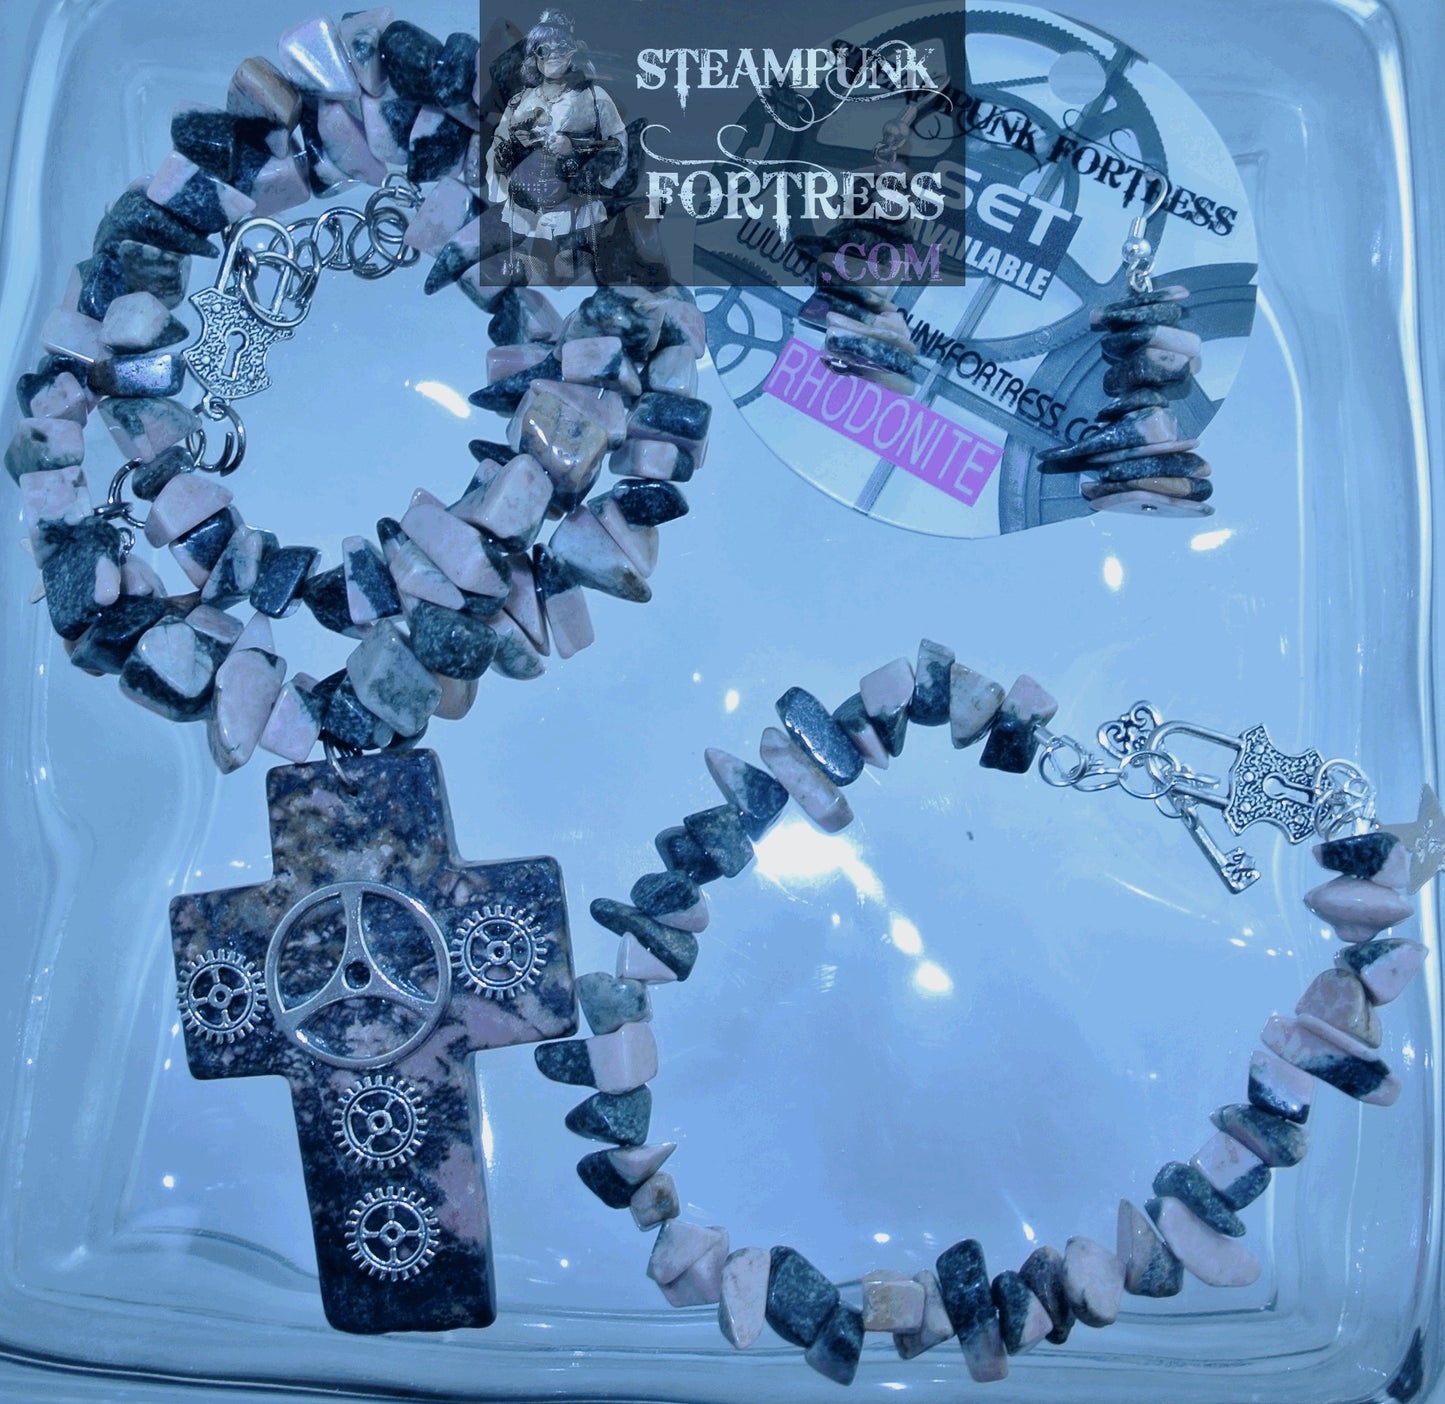 SILVER CROSS RHODONITE GEMSTONES STONES CHIPS 5 SILVER GEARS NECKLACE SET AVAILABLE 2 SIDED REVERSIBLE STARR WILDE STEAMPUNK FORTRESS